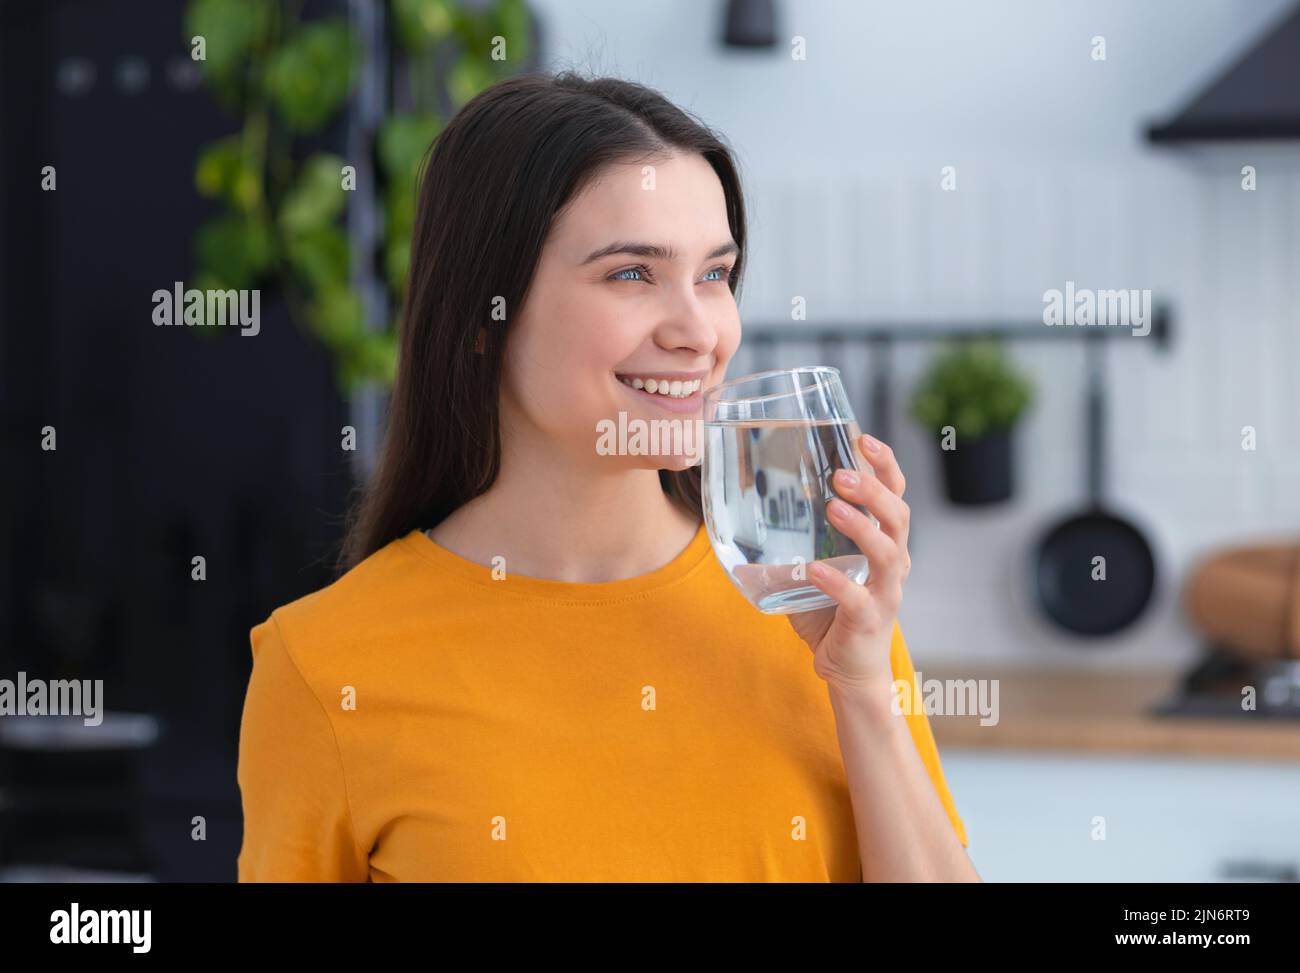 Healthy lifestyle Young smiling caucasian woman holding a glass of clean fresh water Stock Photo